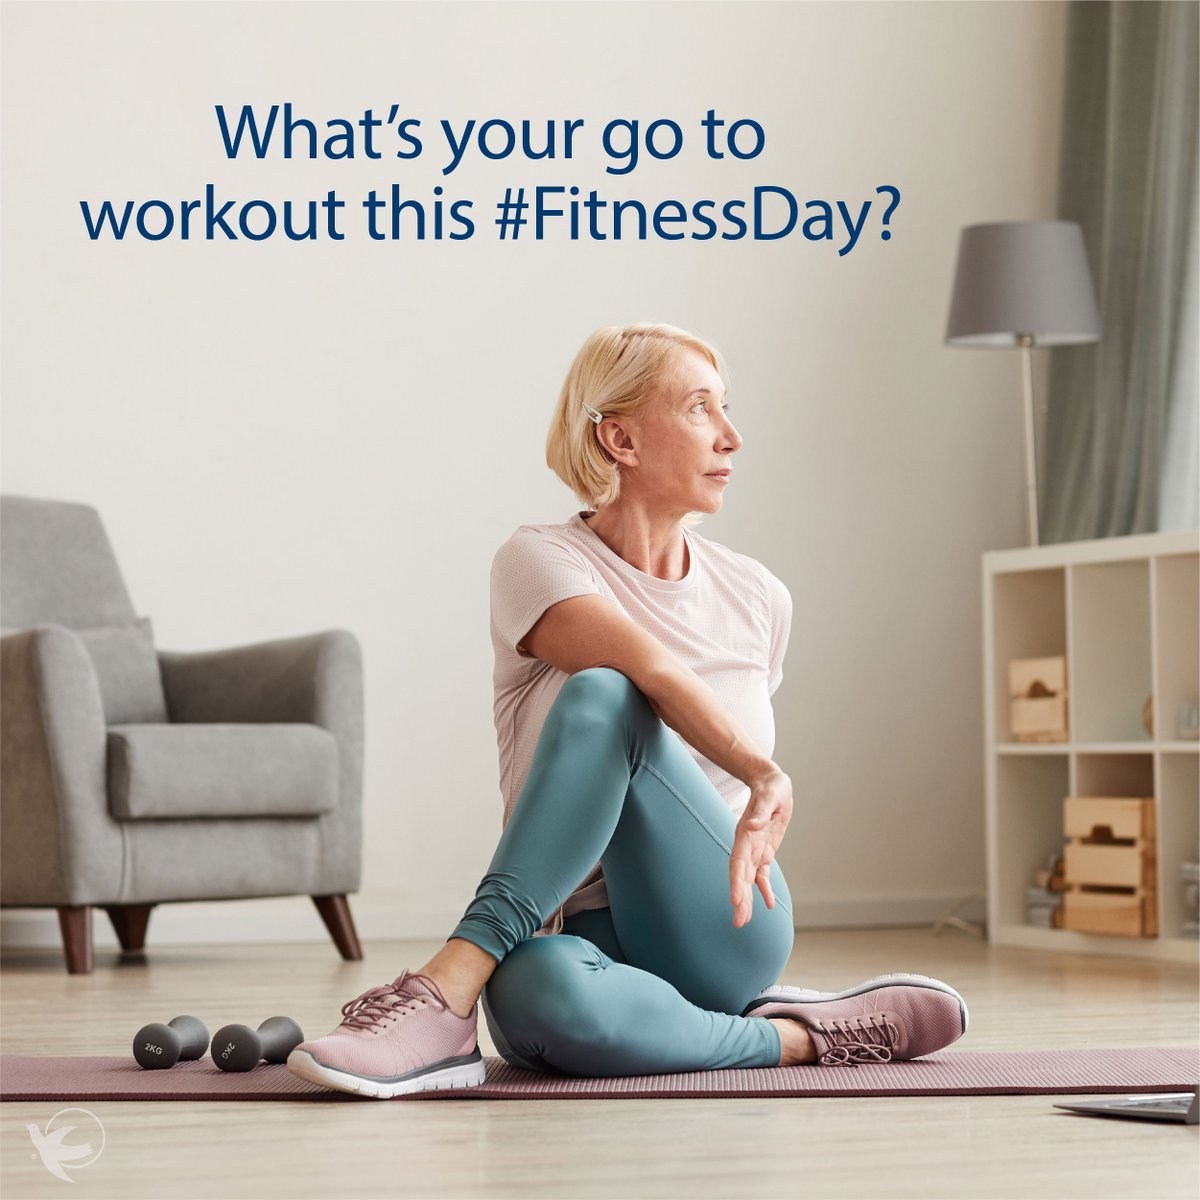 Get ready for a day of health and fitness! 🏋️‍♂️🏃‍♀️💪 #FitnessDay #HealthyLiving